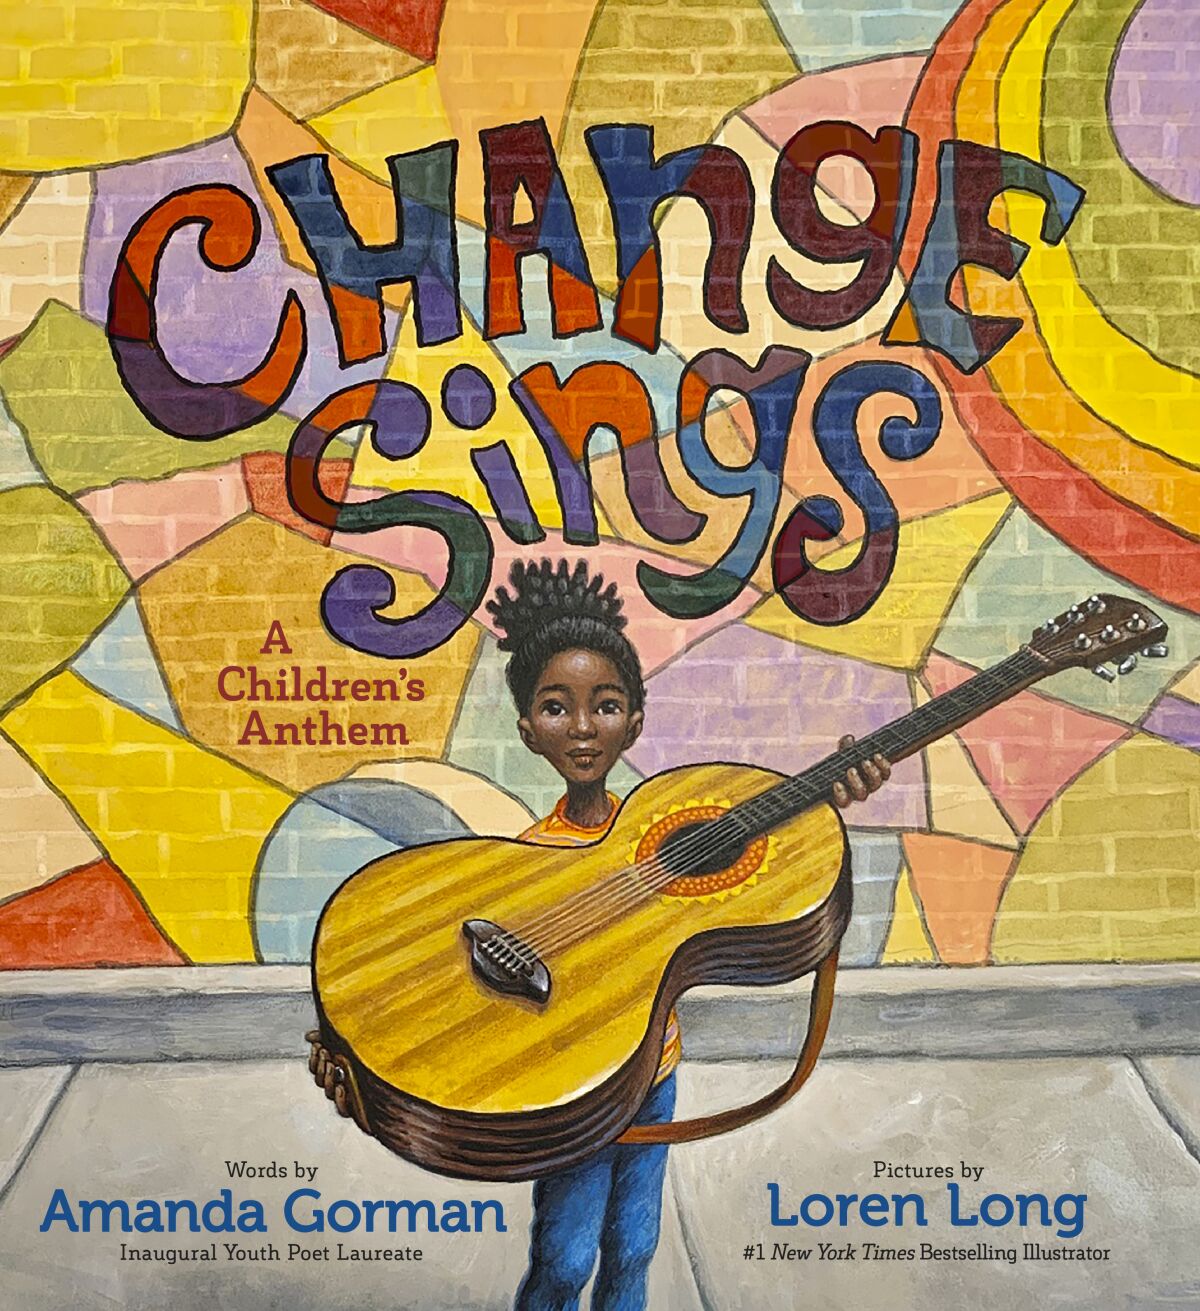 Cover of "Change Sings" shows a Black girl carrying a big guitar and the book title on a multicolored brick wall behind her.